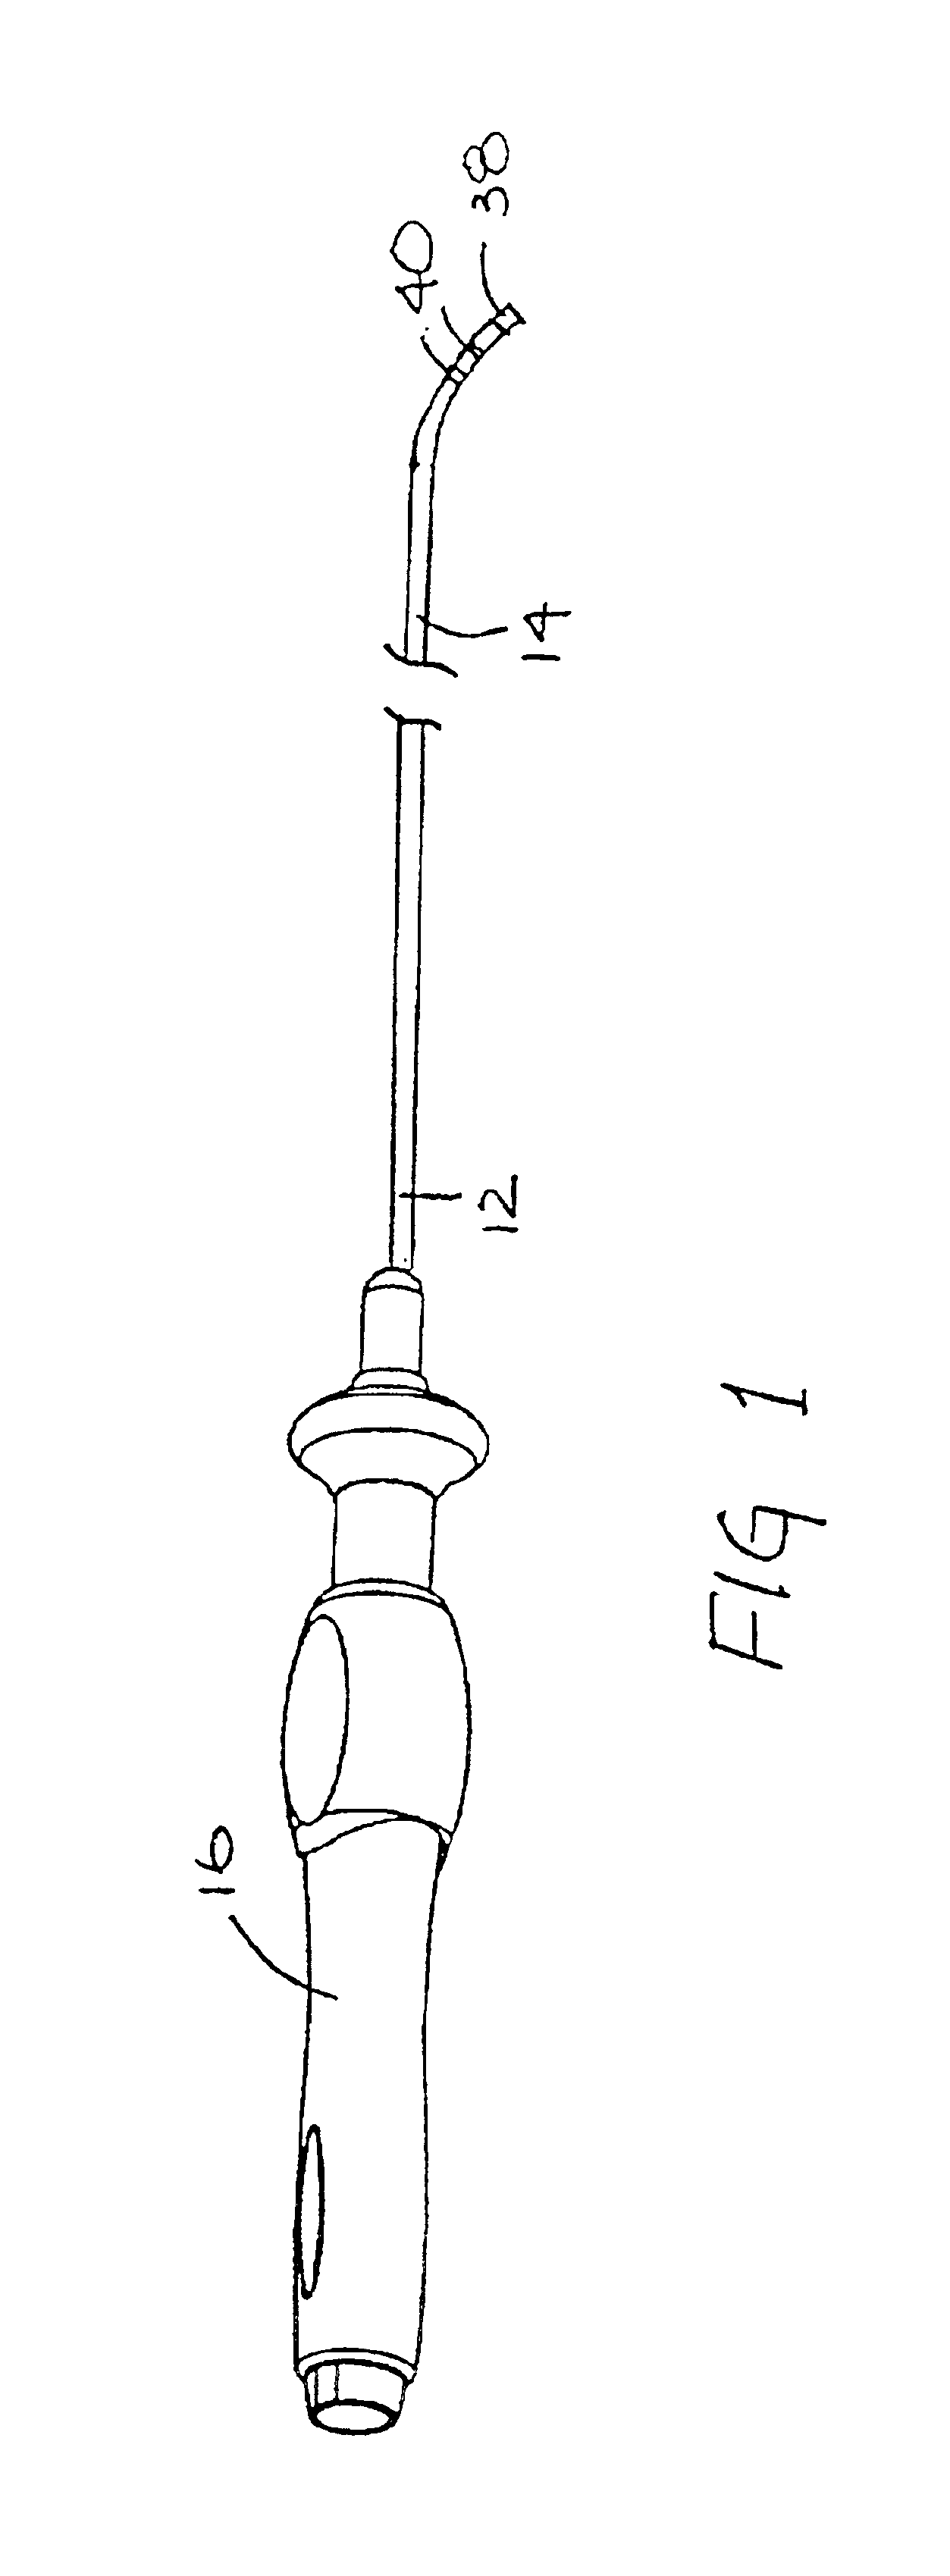 Steerable catheter with reinforced tip